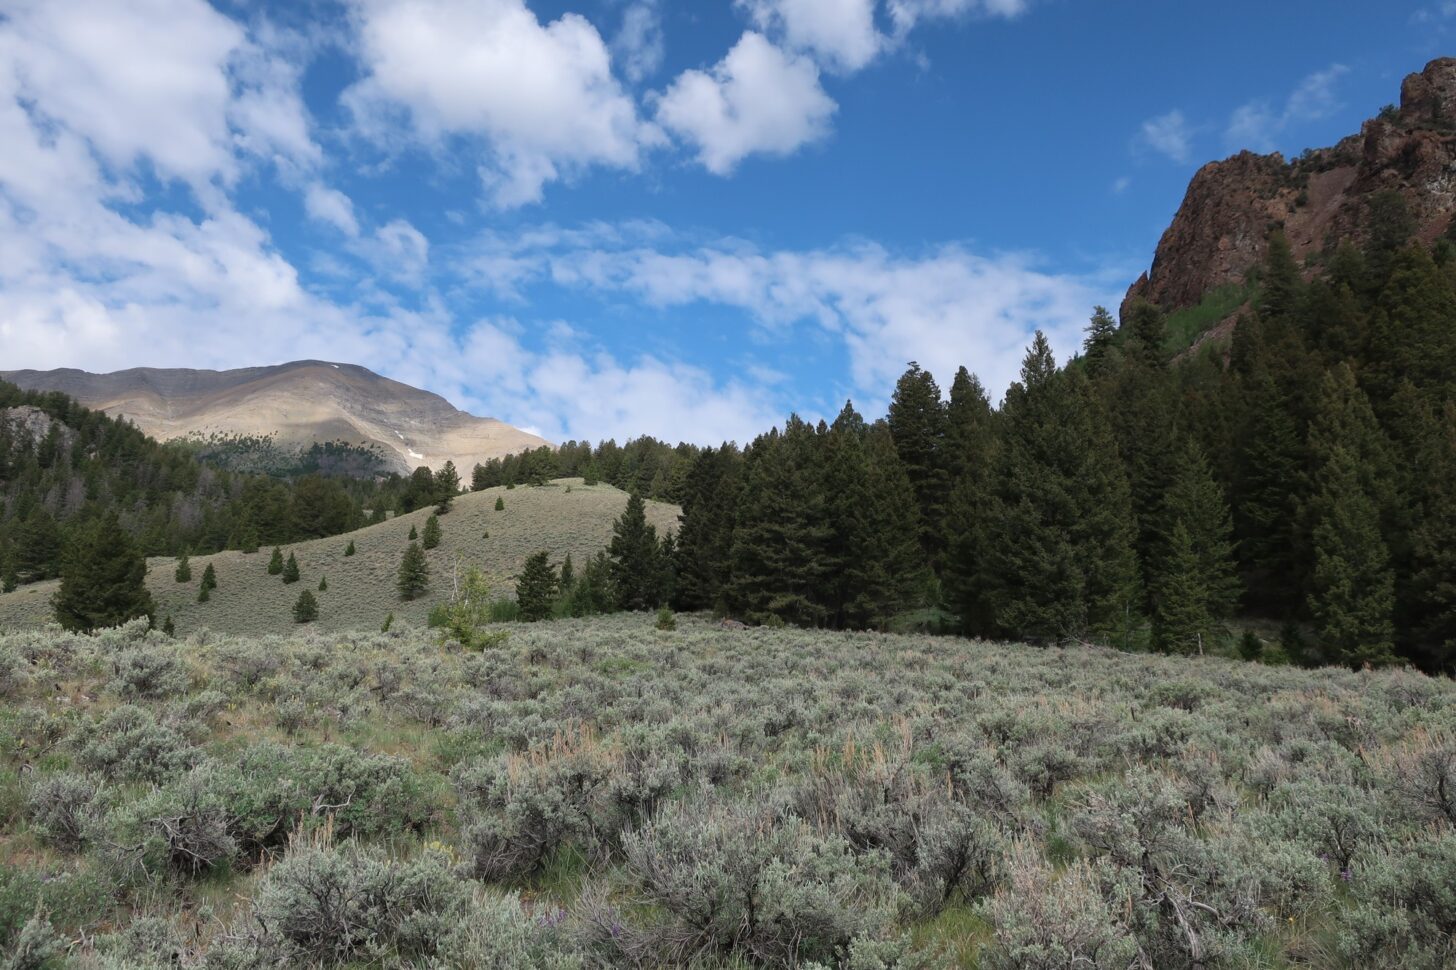 Sagebrush in the foreground, forest in the mid ground, and blue sky